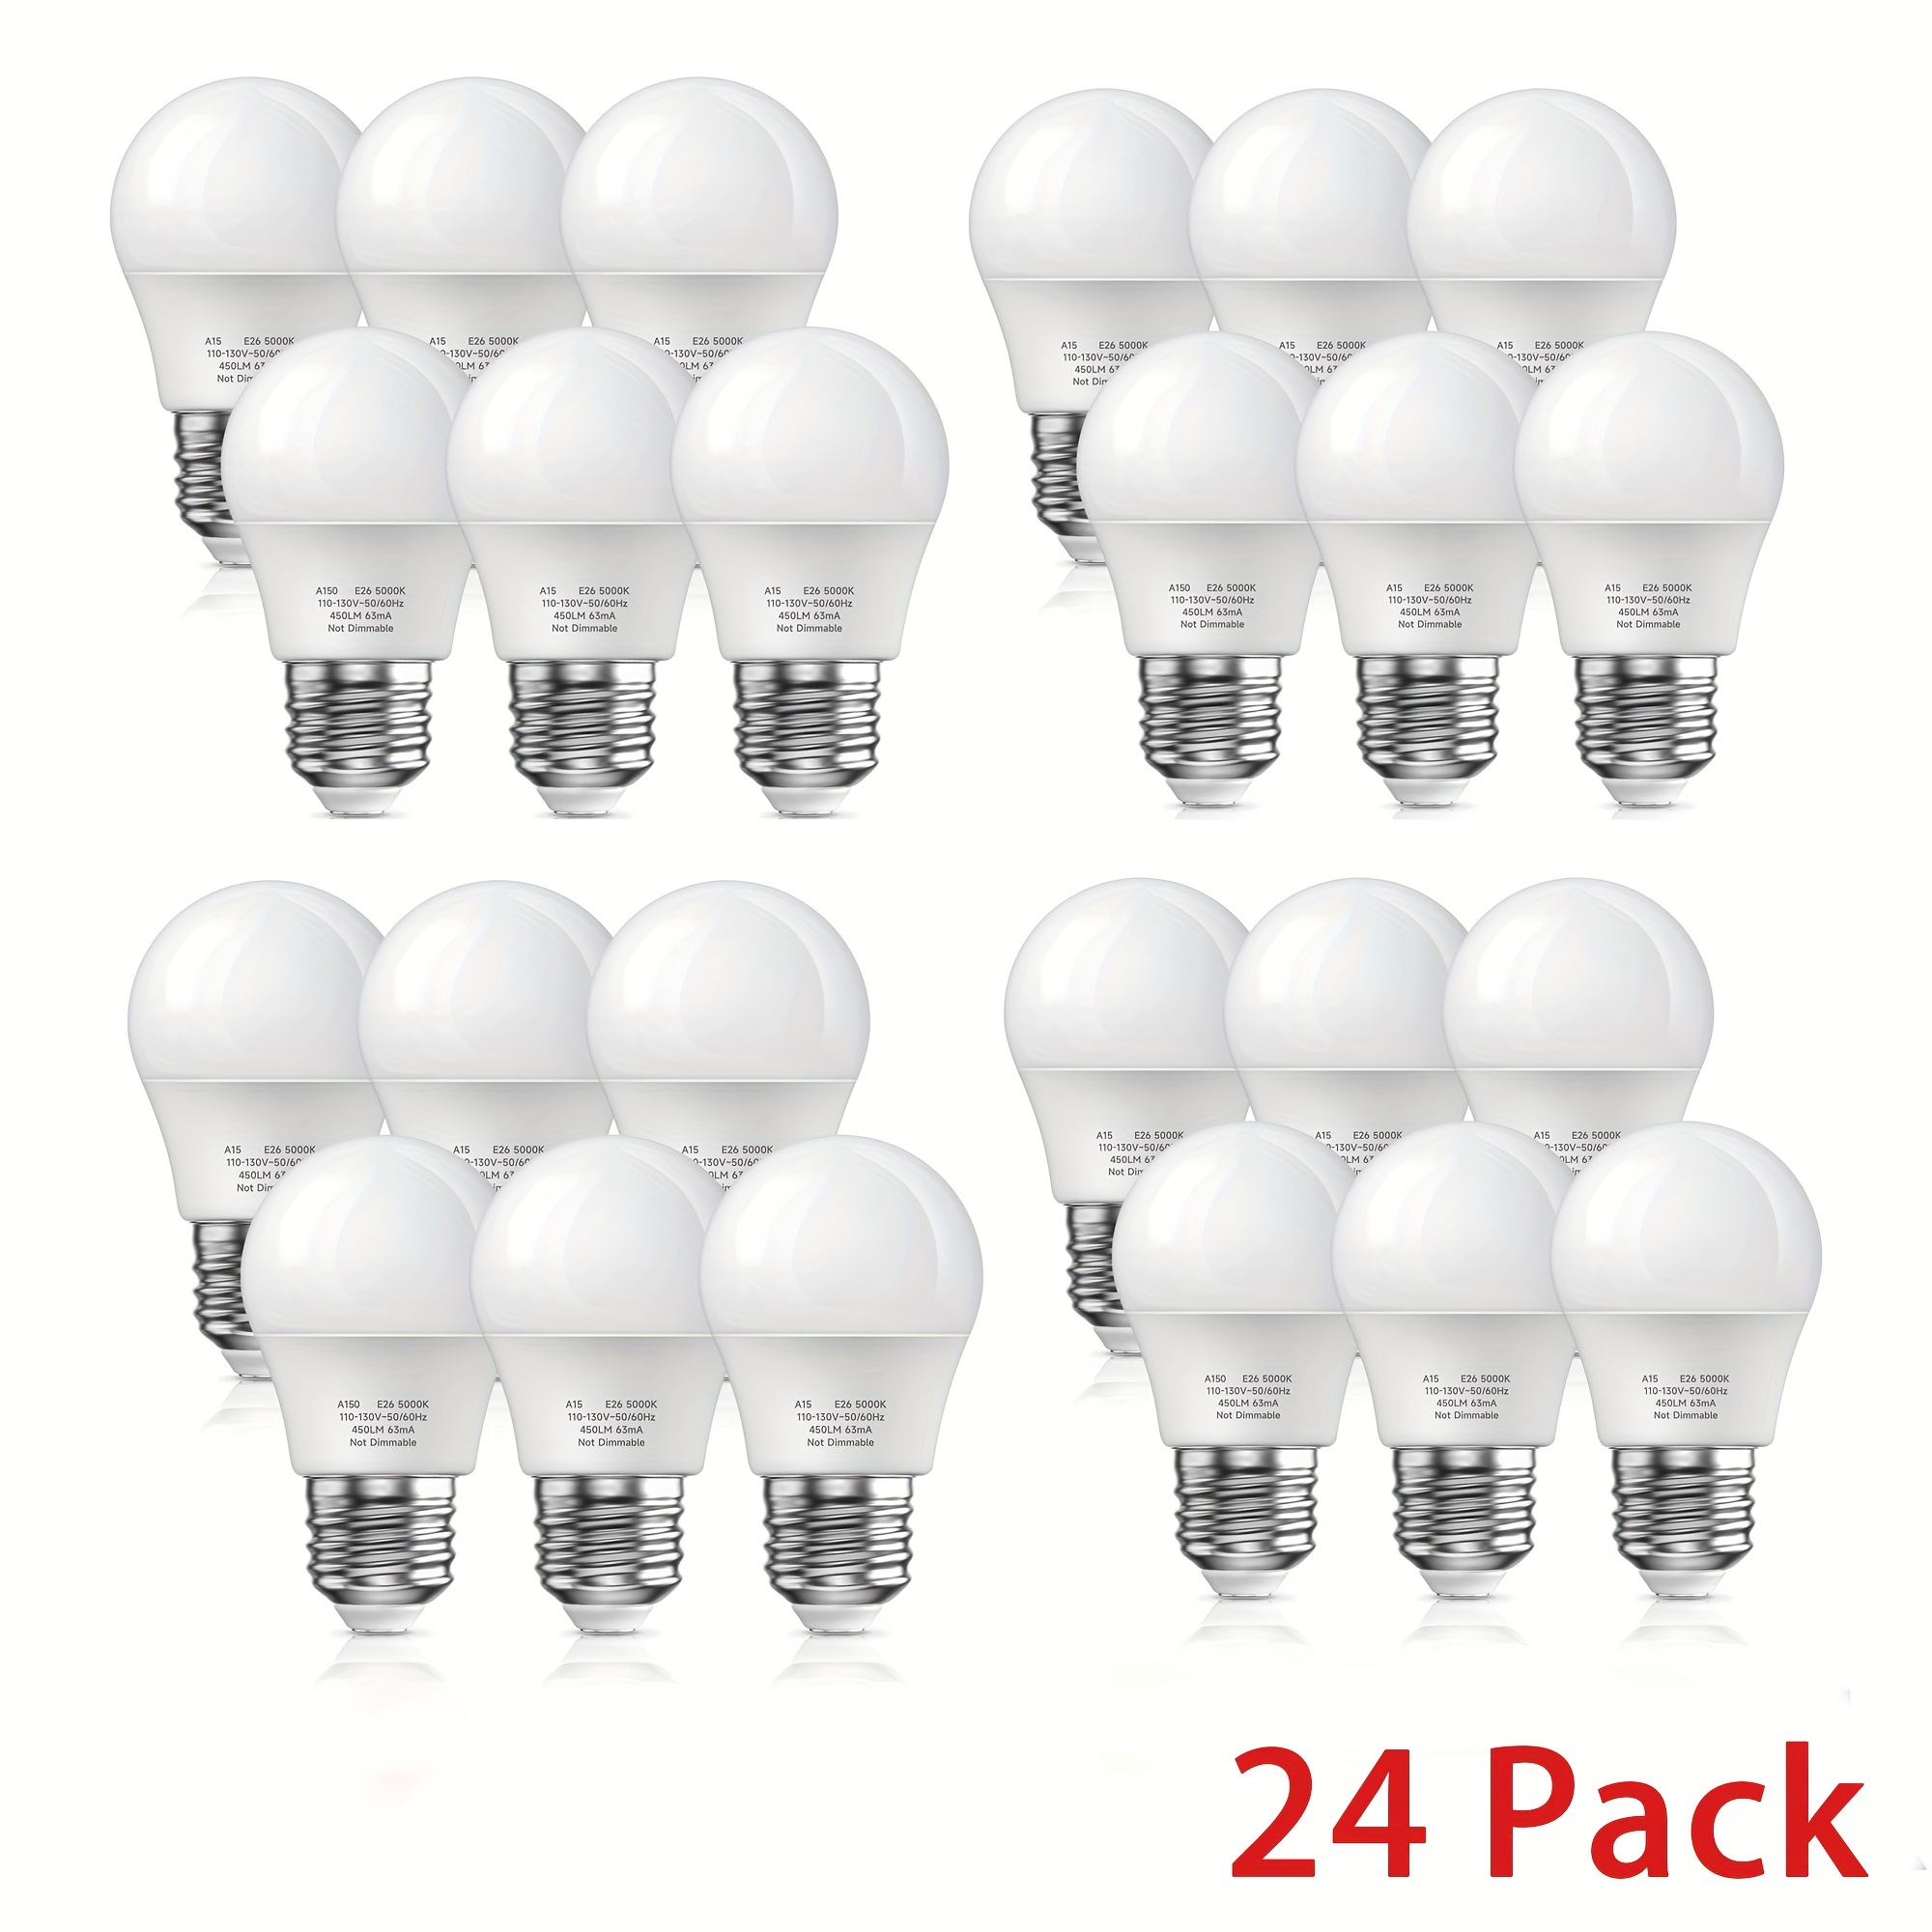 

24pcs E27 3w Led Bulbs Are Equivalent To 30w Incandescent Lamps, Cold White 6000k Warm White 3000k 300 Lumen Ultra-bright Bulb Lamps Are Applicable To Living Room, Kitchen, Bedroom And Office